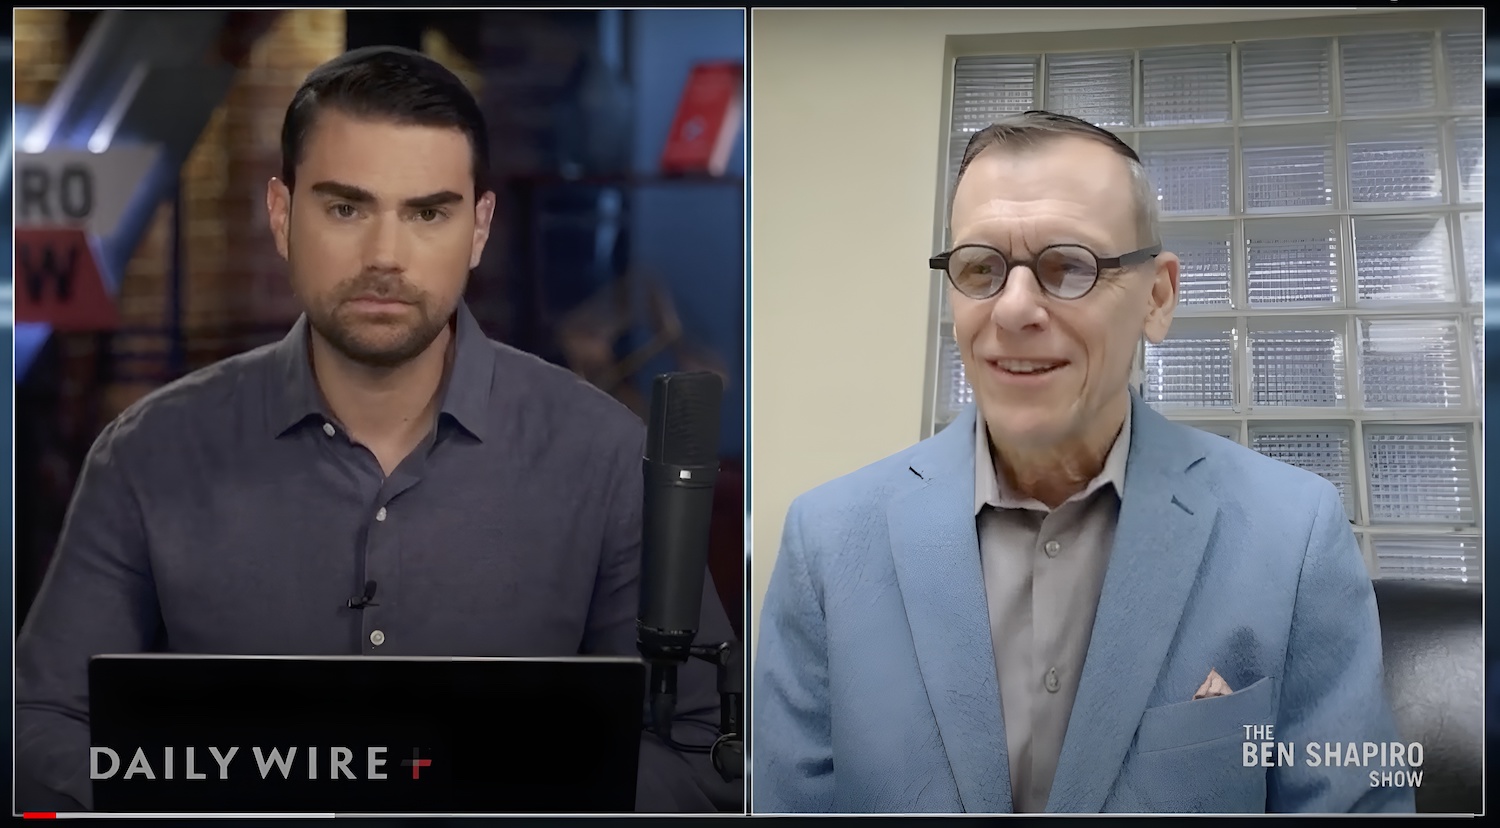 side by side image of Ben Shapiro and Dan Steiner